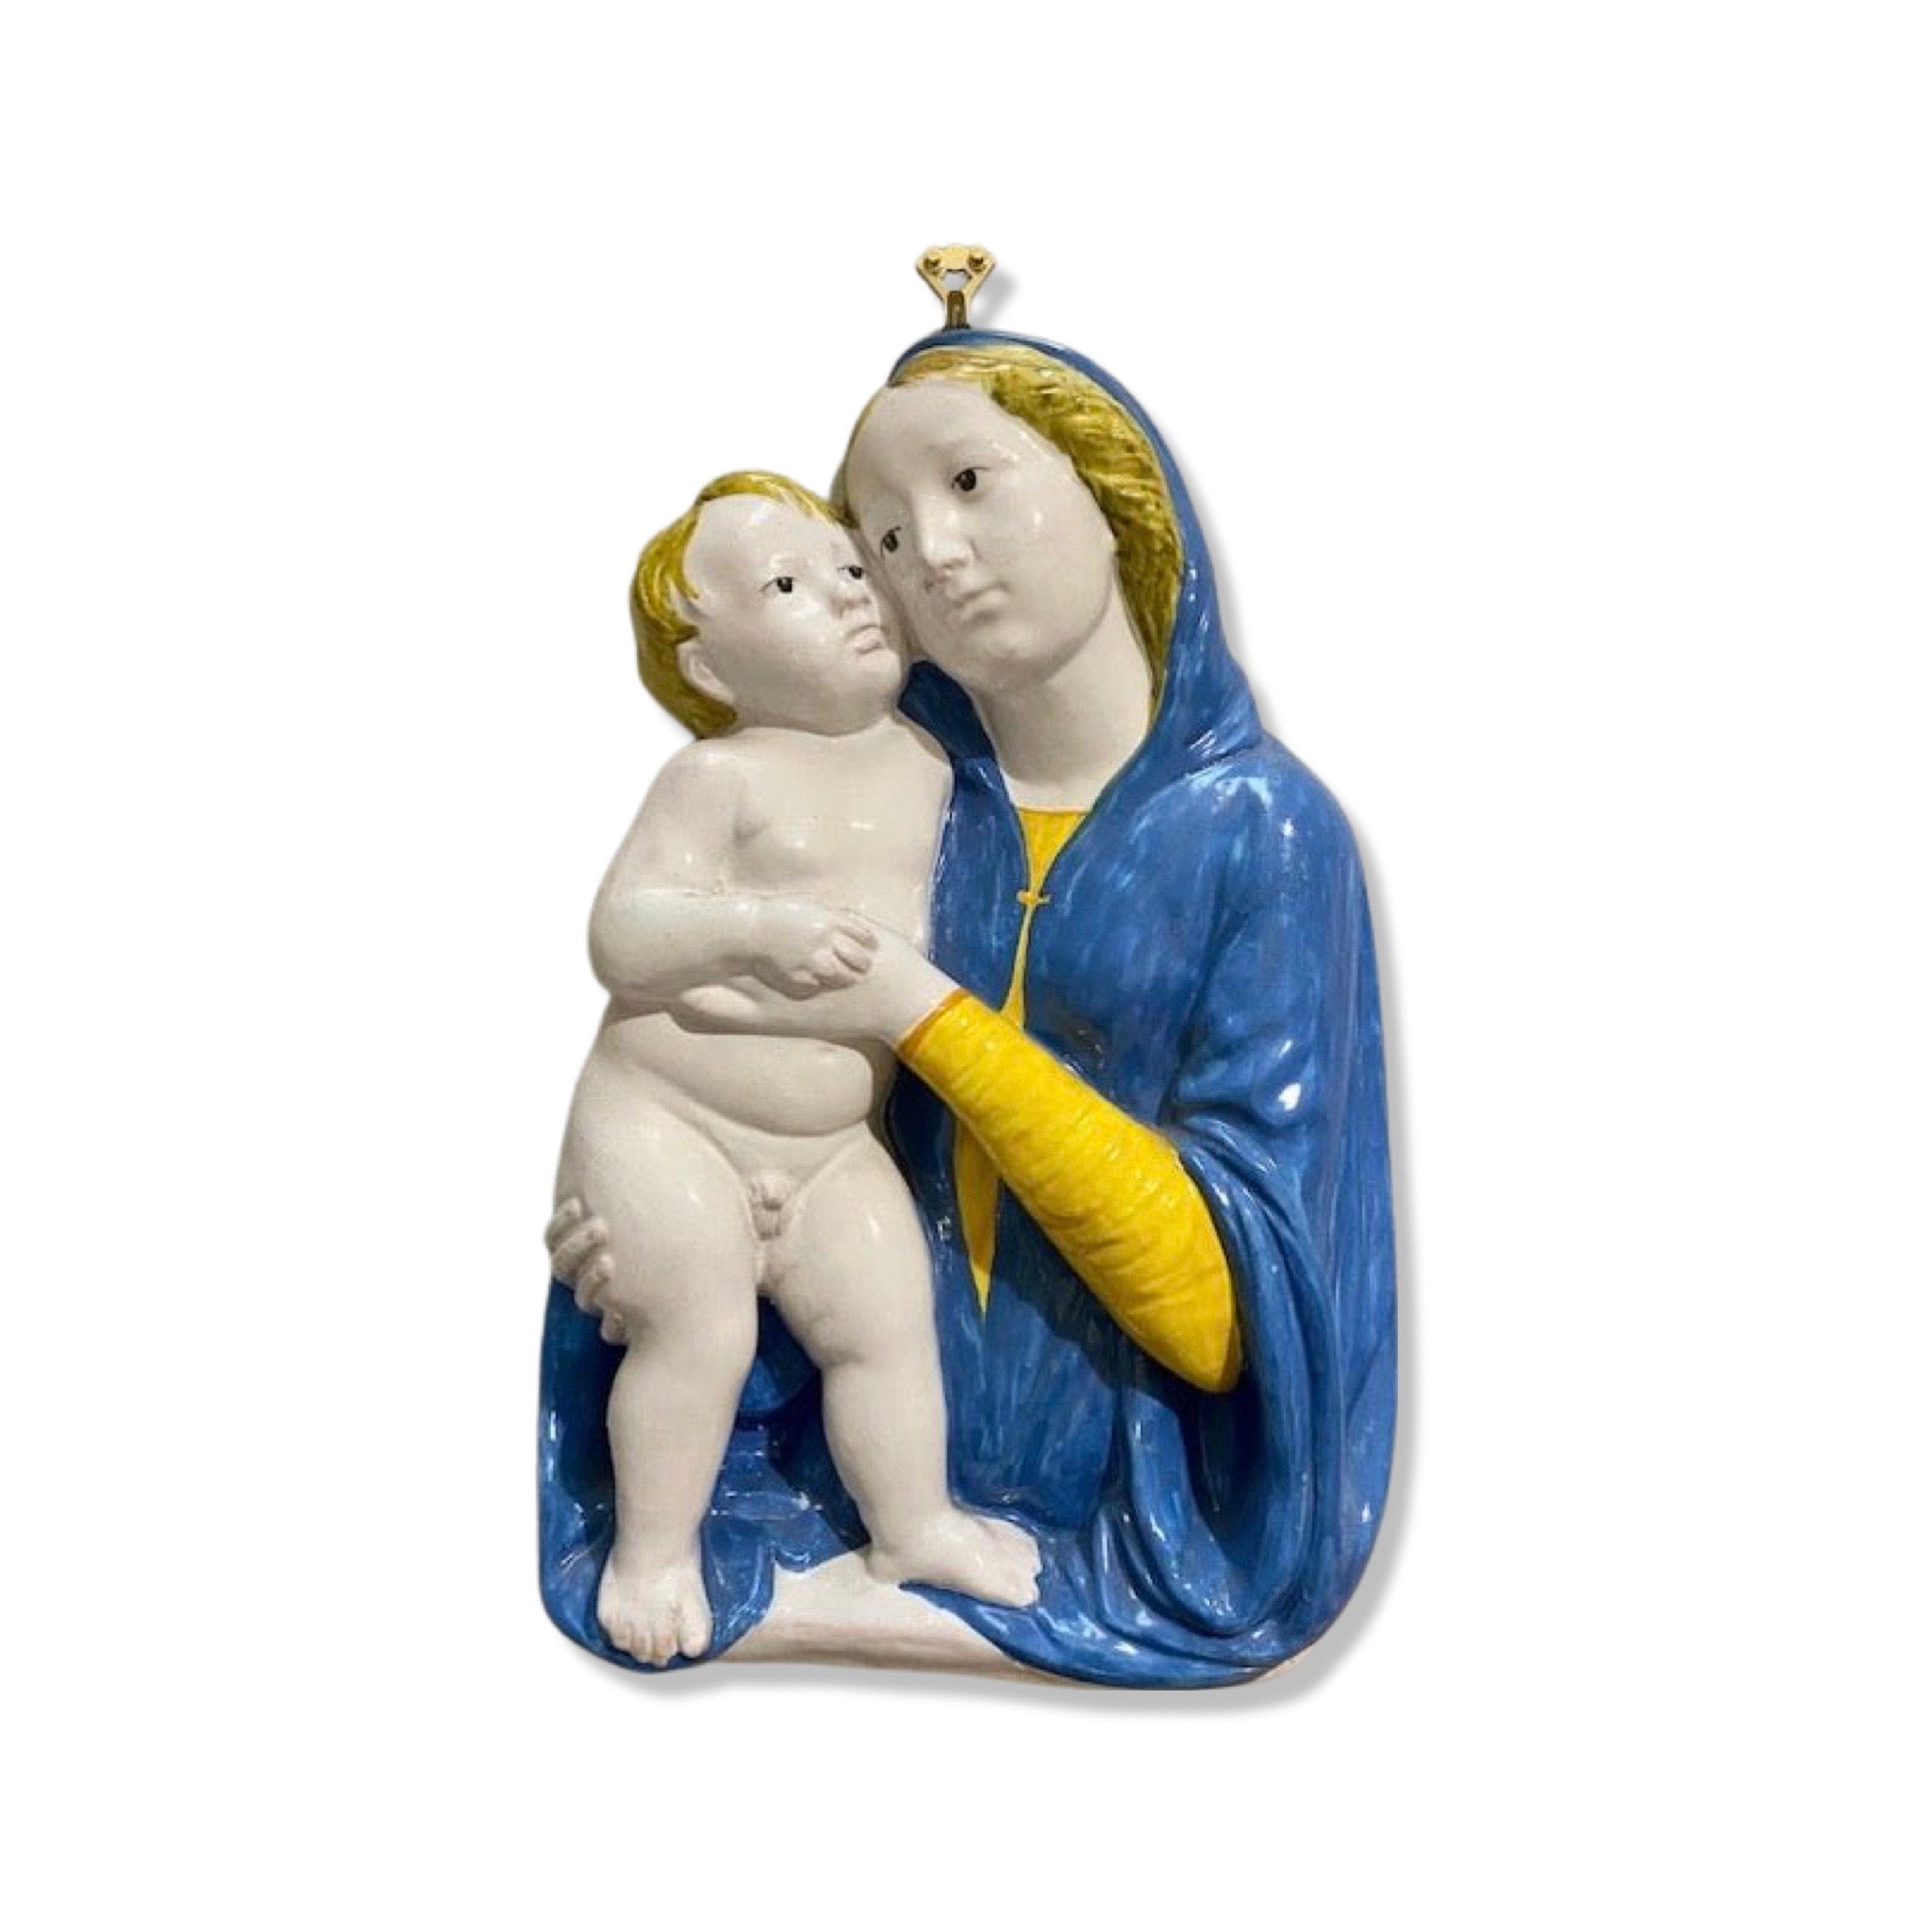 Della Robbia Madonna & Child, ceramics, pottery, italian design, majolica, handmade, handcrafted, handpainted, home decor, kitchen art, home goods, deruta, majolica, Artisan, treasures, traditional art, modern art, gift ideas, style, SF, shop small business, artists, shop online, landmark store, legacy, one of a kind, limited edition, gift guide, gift shop, retail shop, decorations, shopping, italy, home staging, home decorating, home interiors